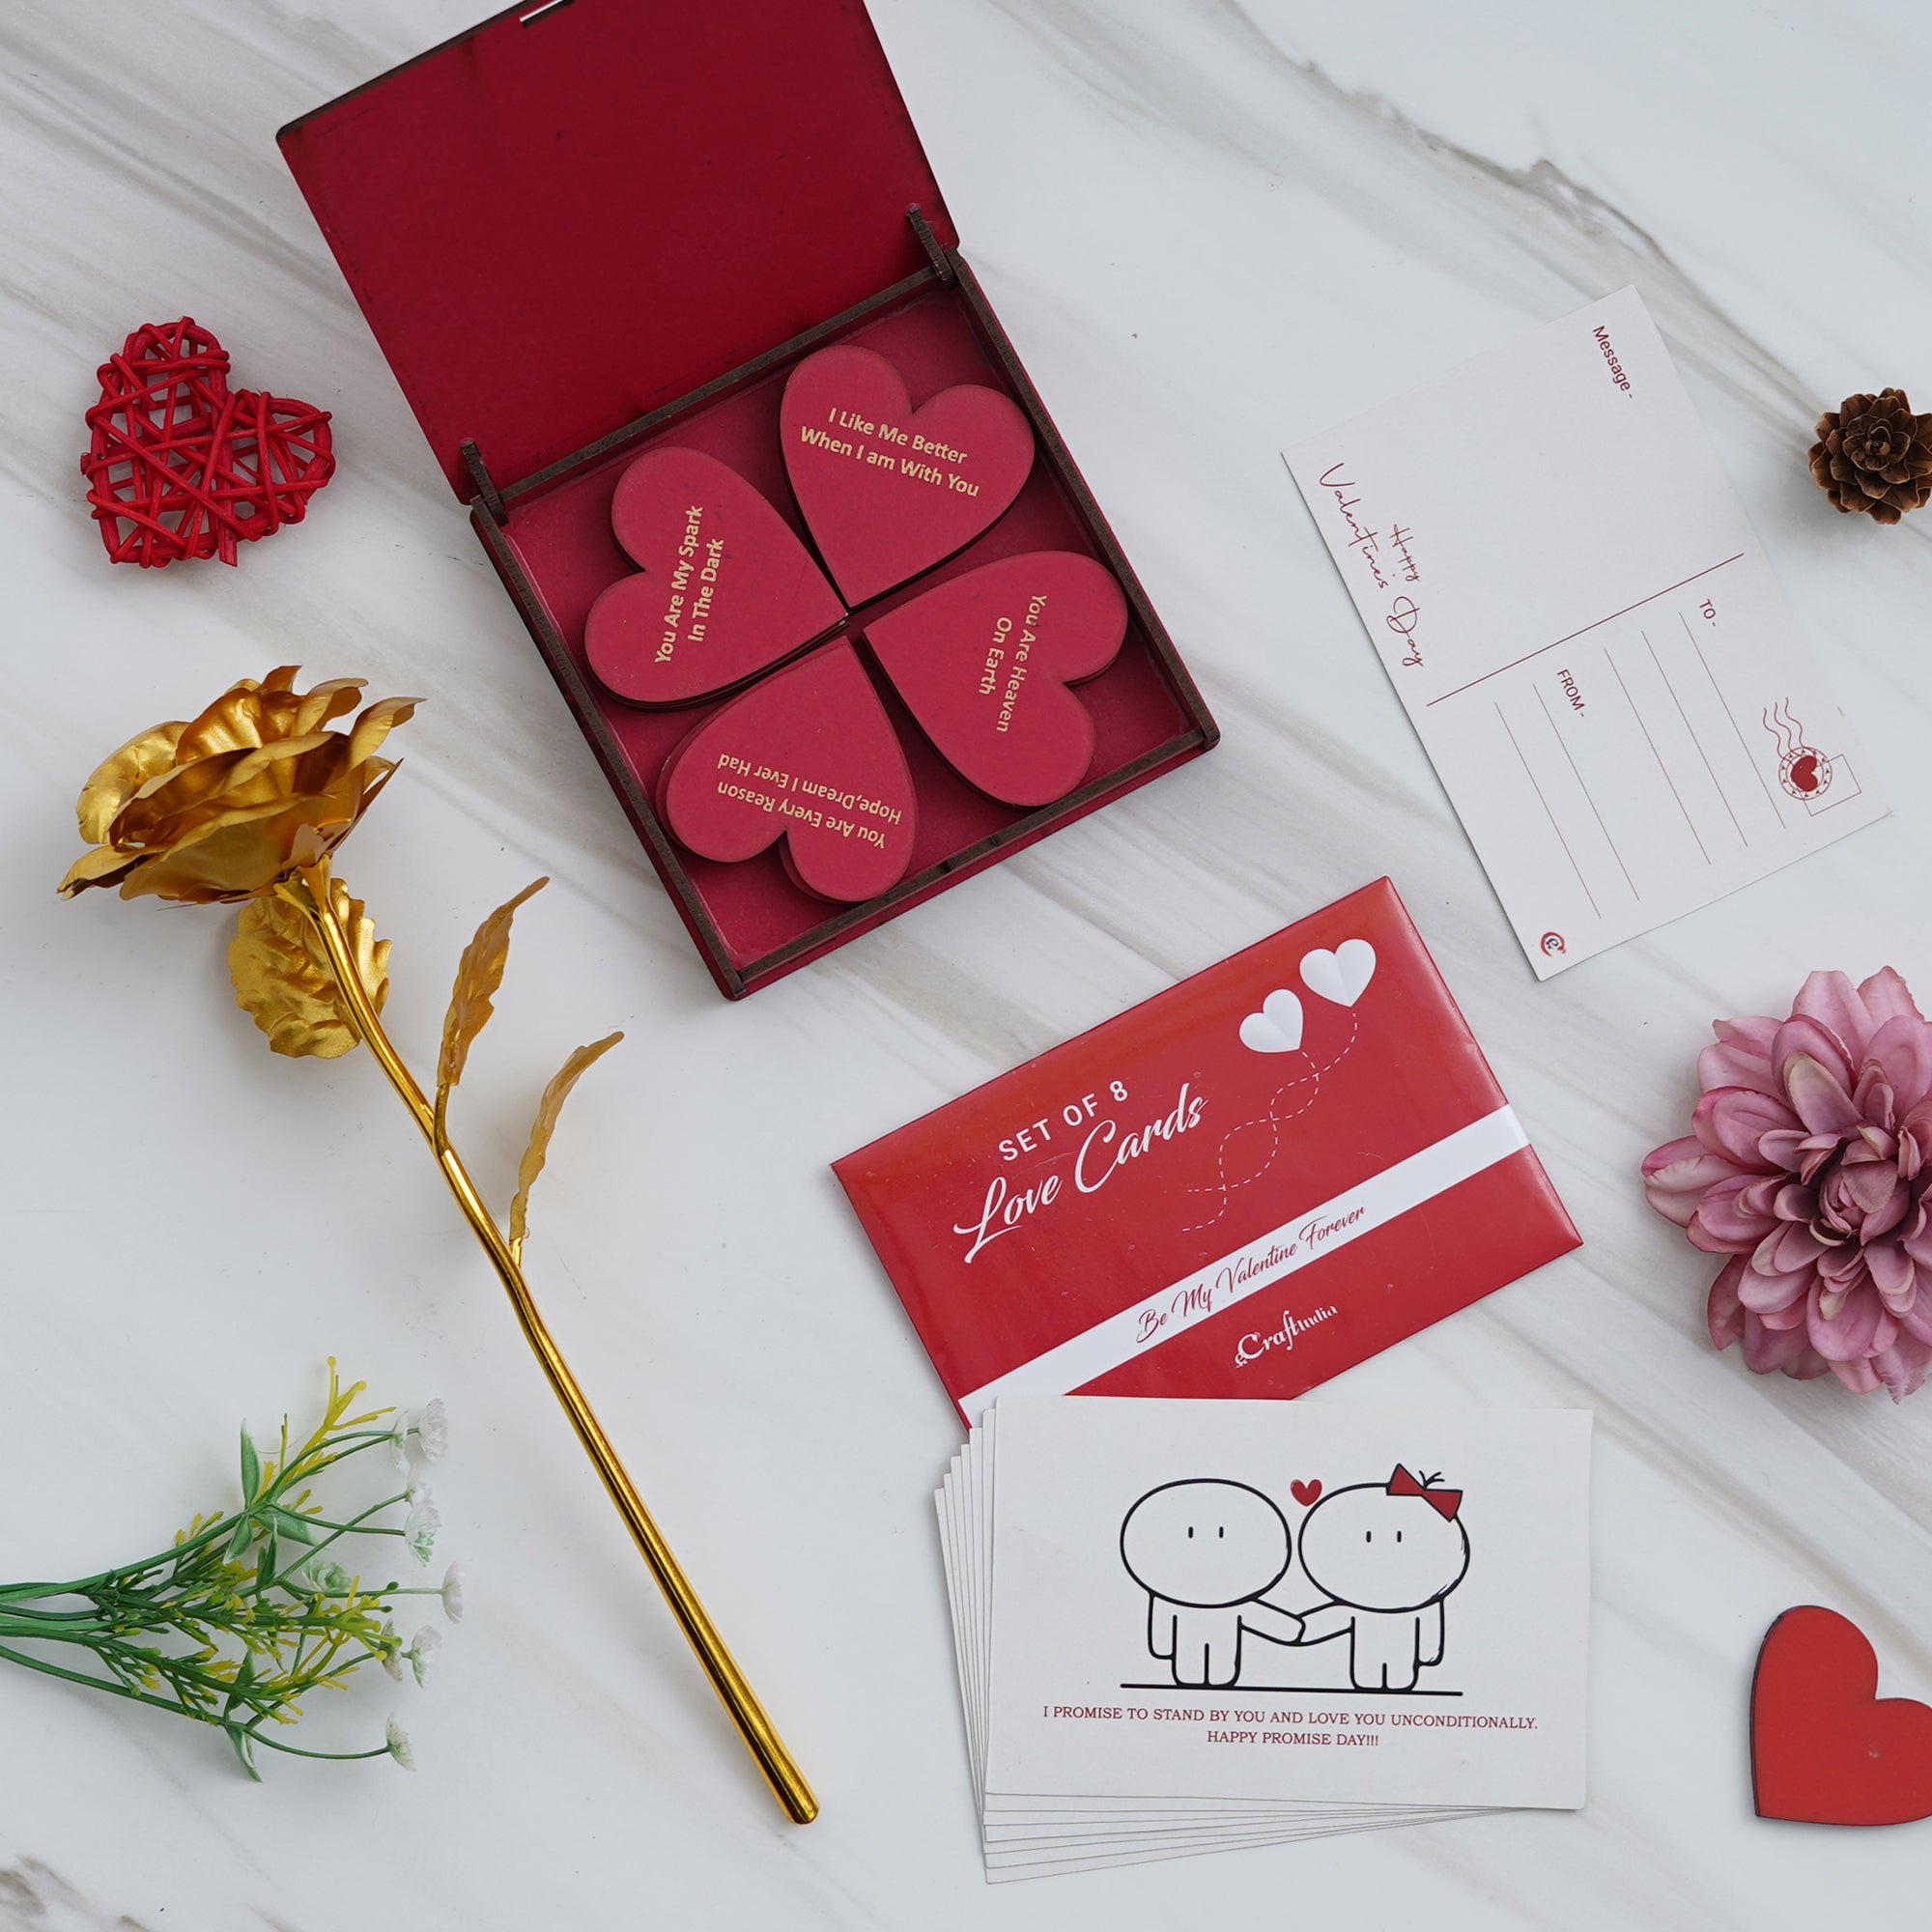 Valentine Combo of Set of 8 Love Post Cards Gift Cards Set, Golden Rose Gift Set, "20 Reasons Why I Love You" Printed on Little Red Hearts Decorative Wooden Gift Set Box